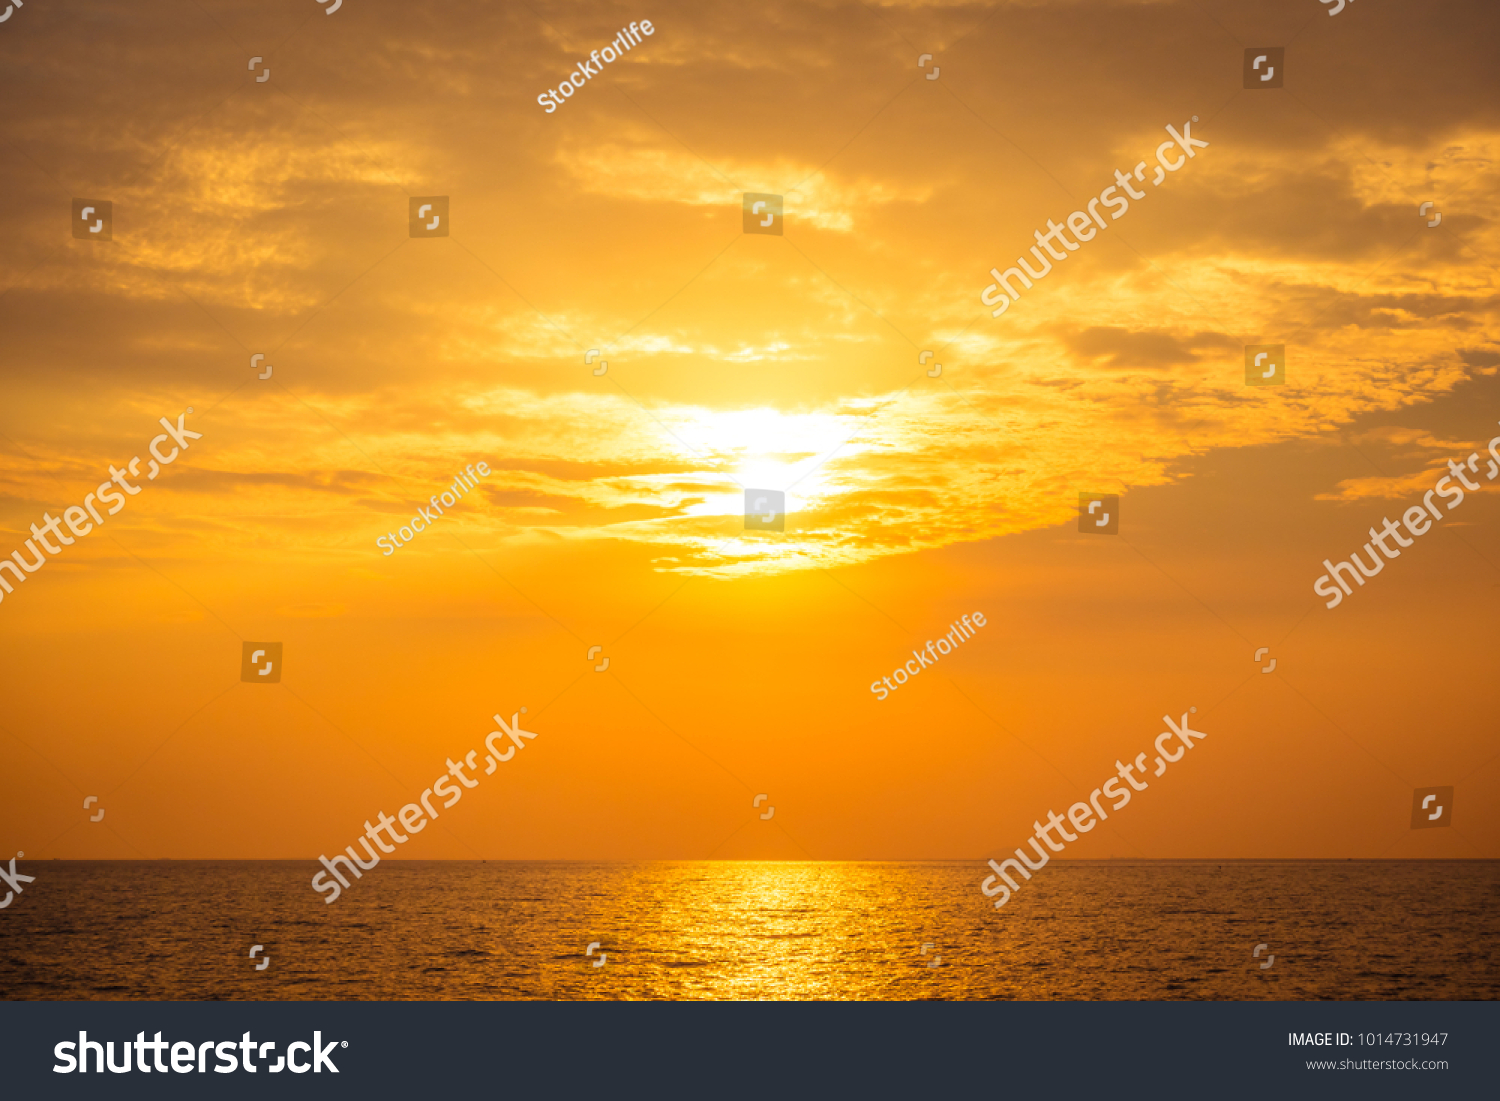 Beautiful sunset on the beach and sea - Vintage Filter #1014731947